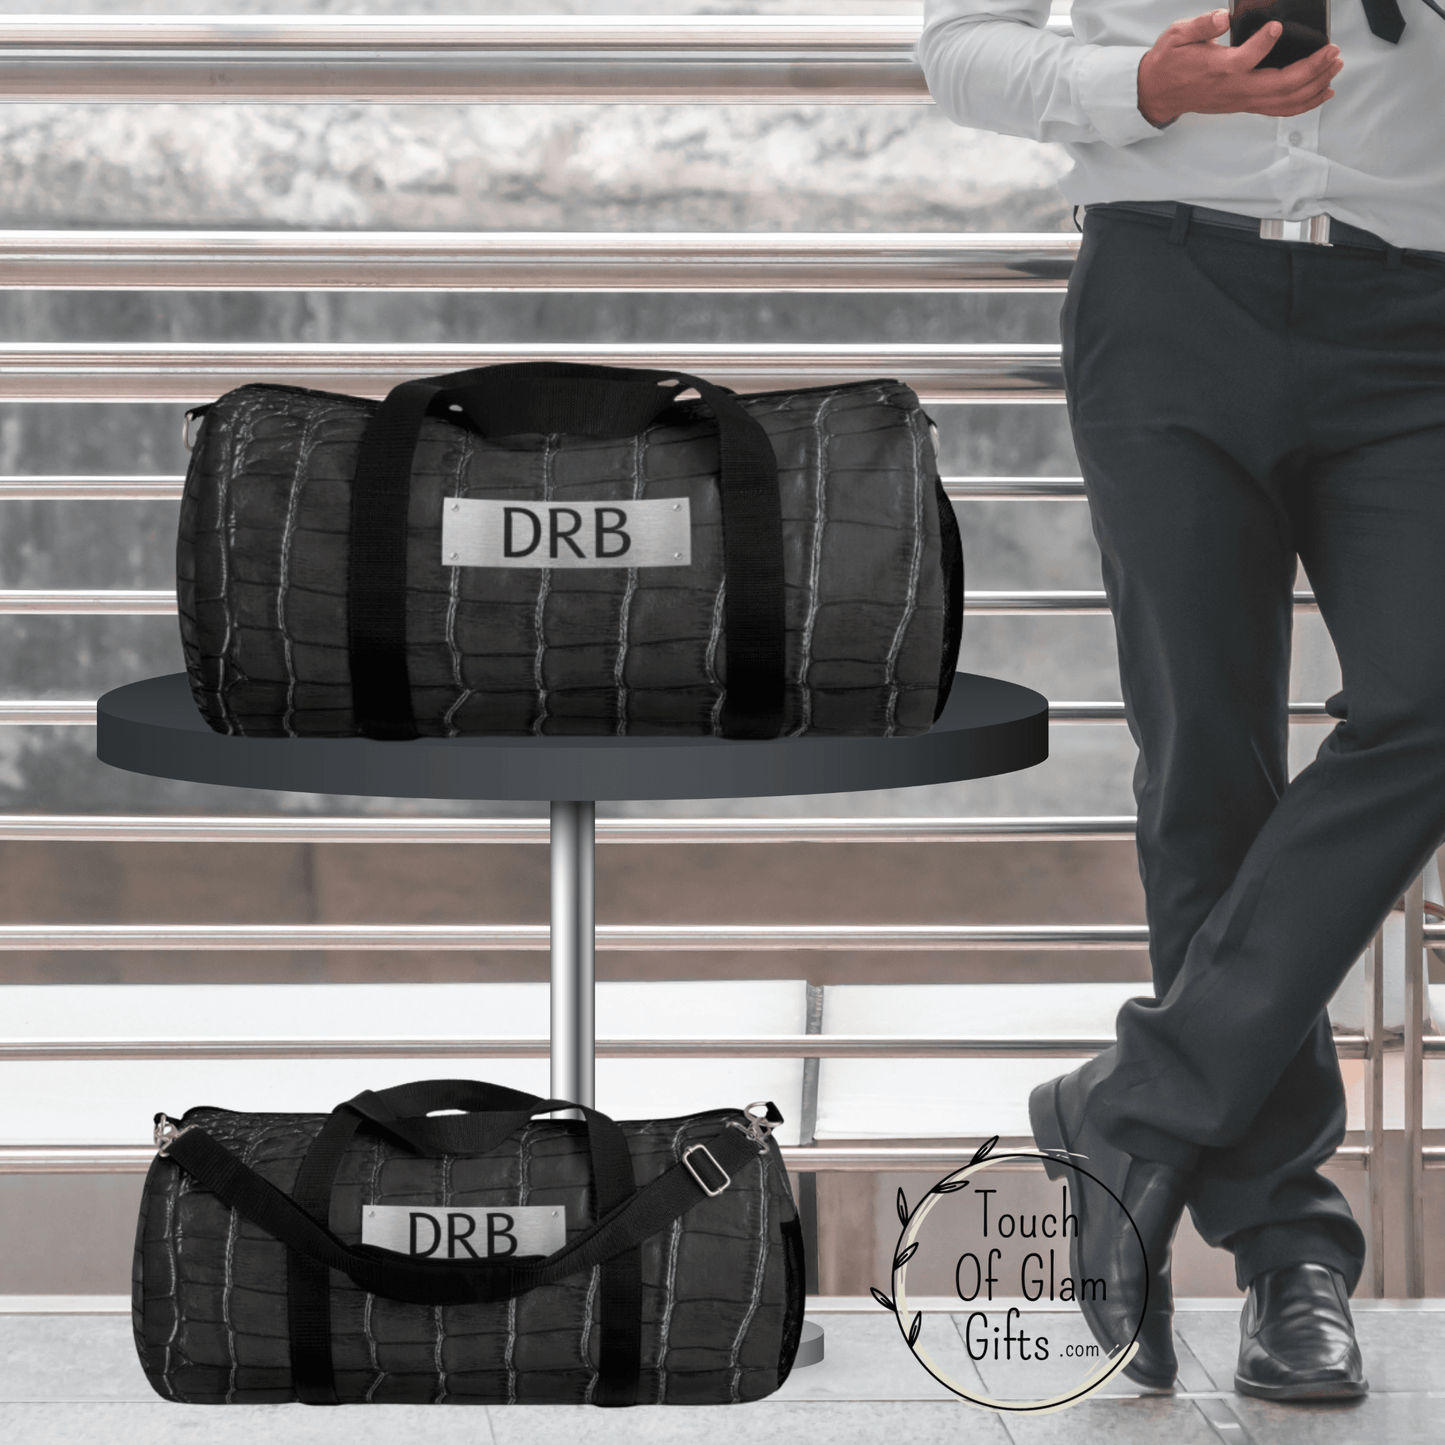 Custom monogrammed mens dufffel bag comes in a large duffel bag and small carry on size duffel bag. These personalized bags make the perfect gift for groomsmen gifts and gifts for guys.